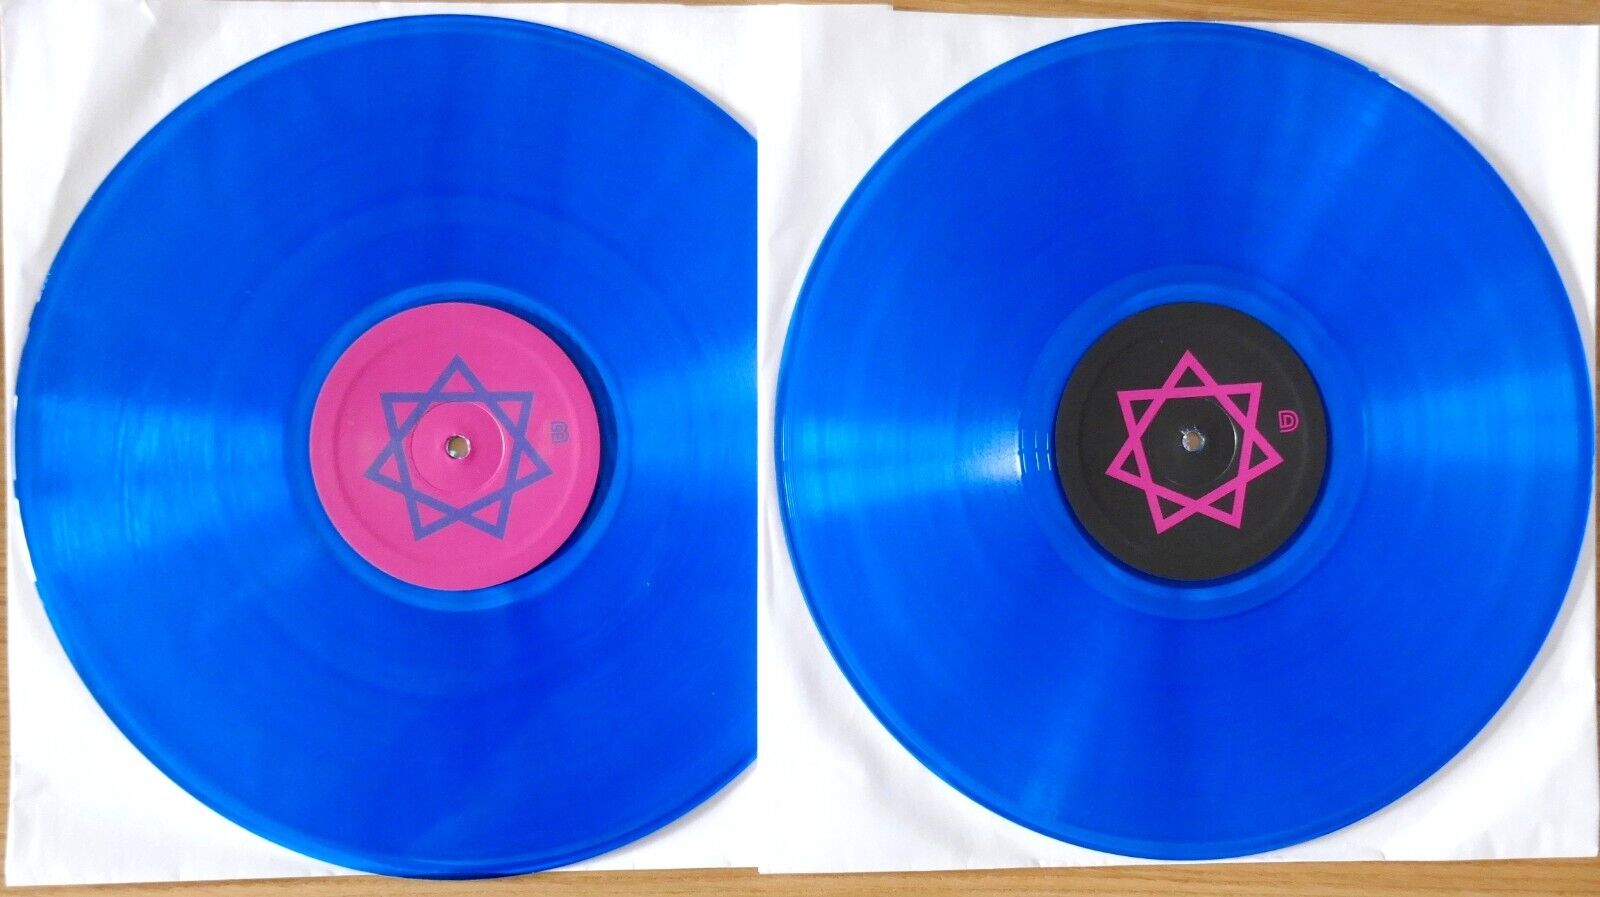 TOOL - 2LP LIVE ITALY 2019 BLUE TRANSPARENT COLORED VINYL * RARE * 150 only!